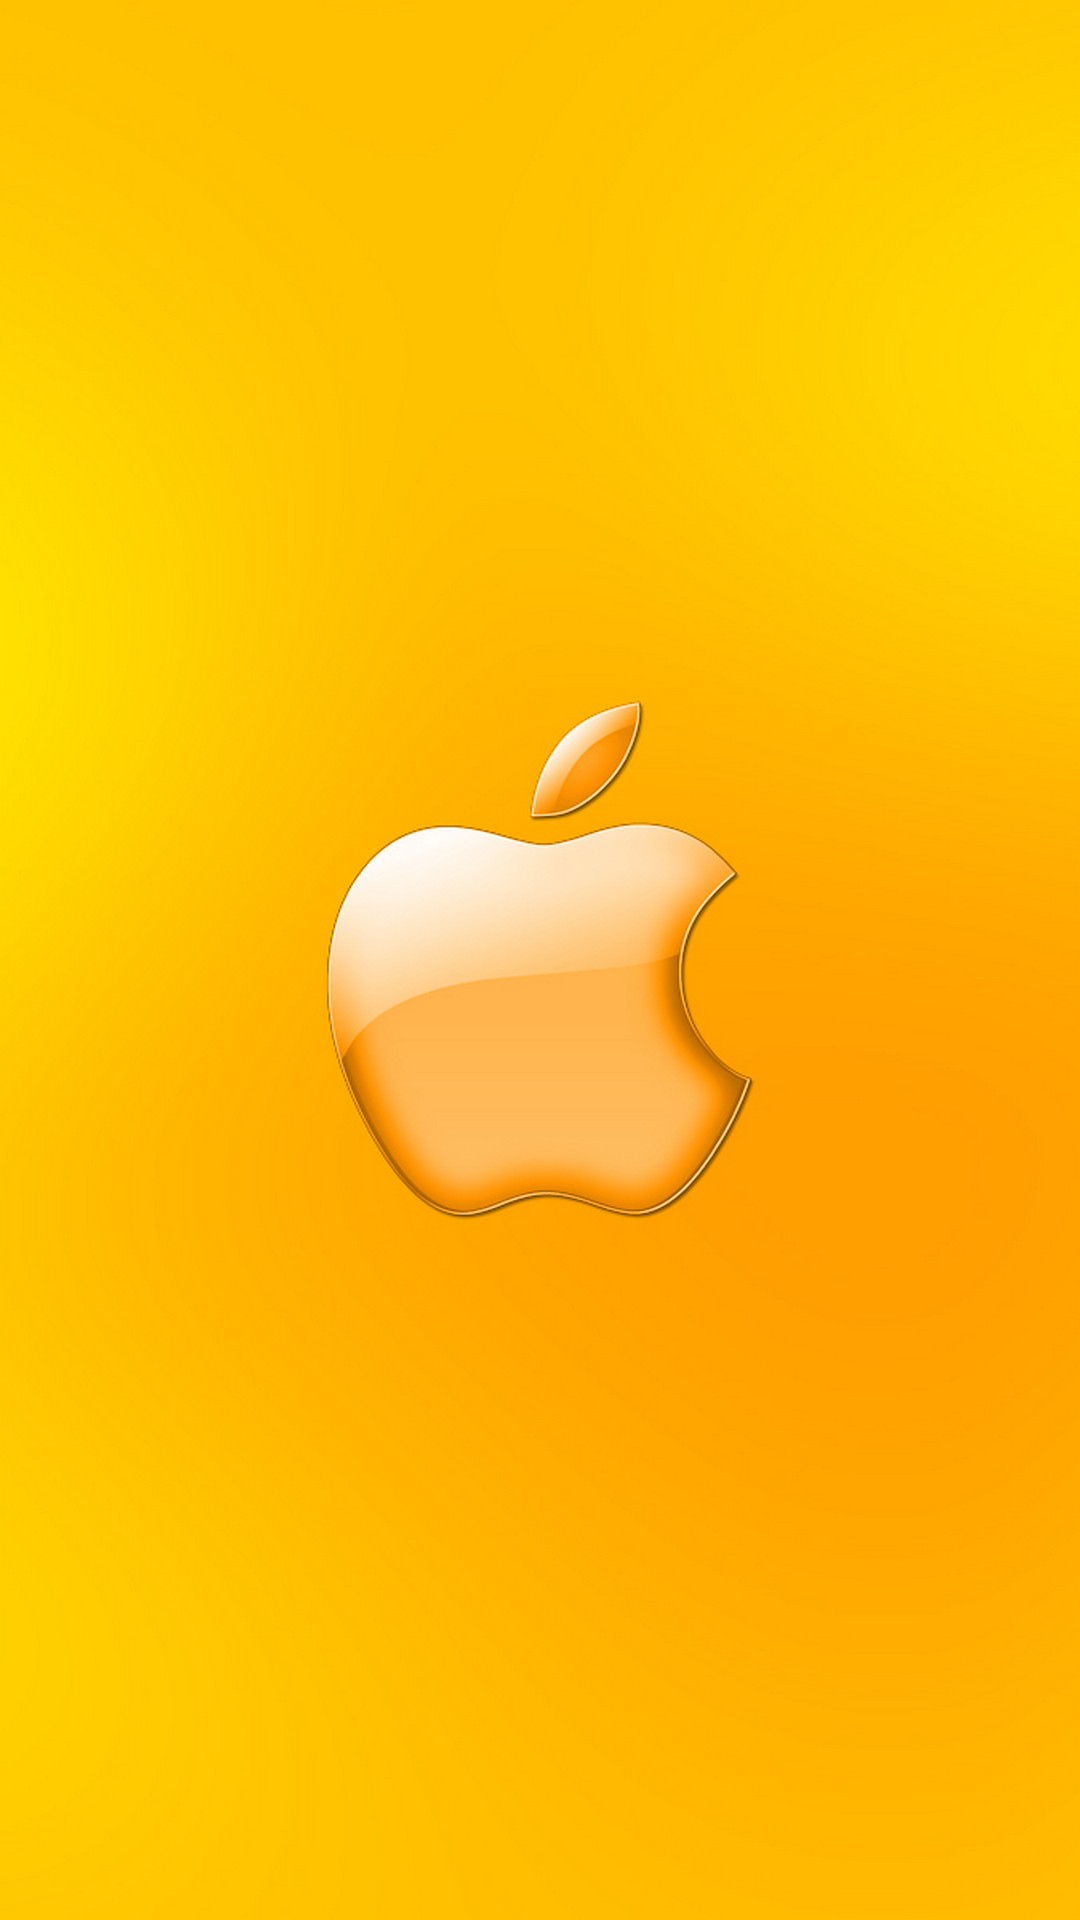 Apple Gold Logo For Android Wallpaper 2021 Android Wallpapers